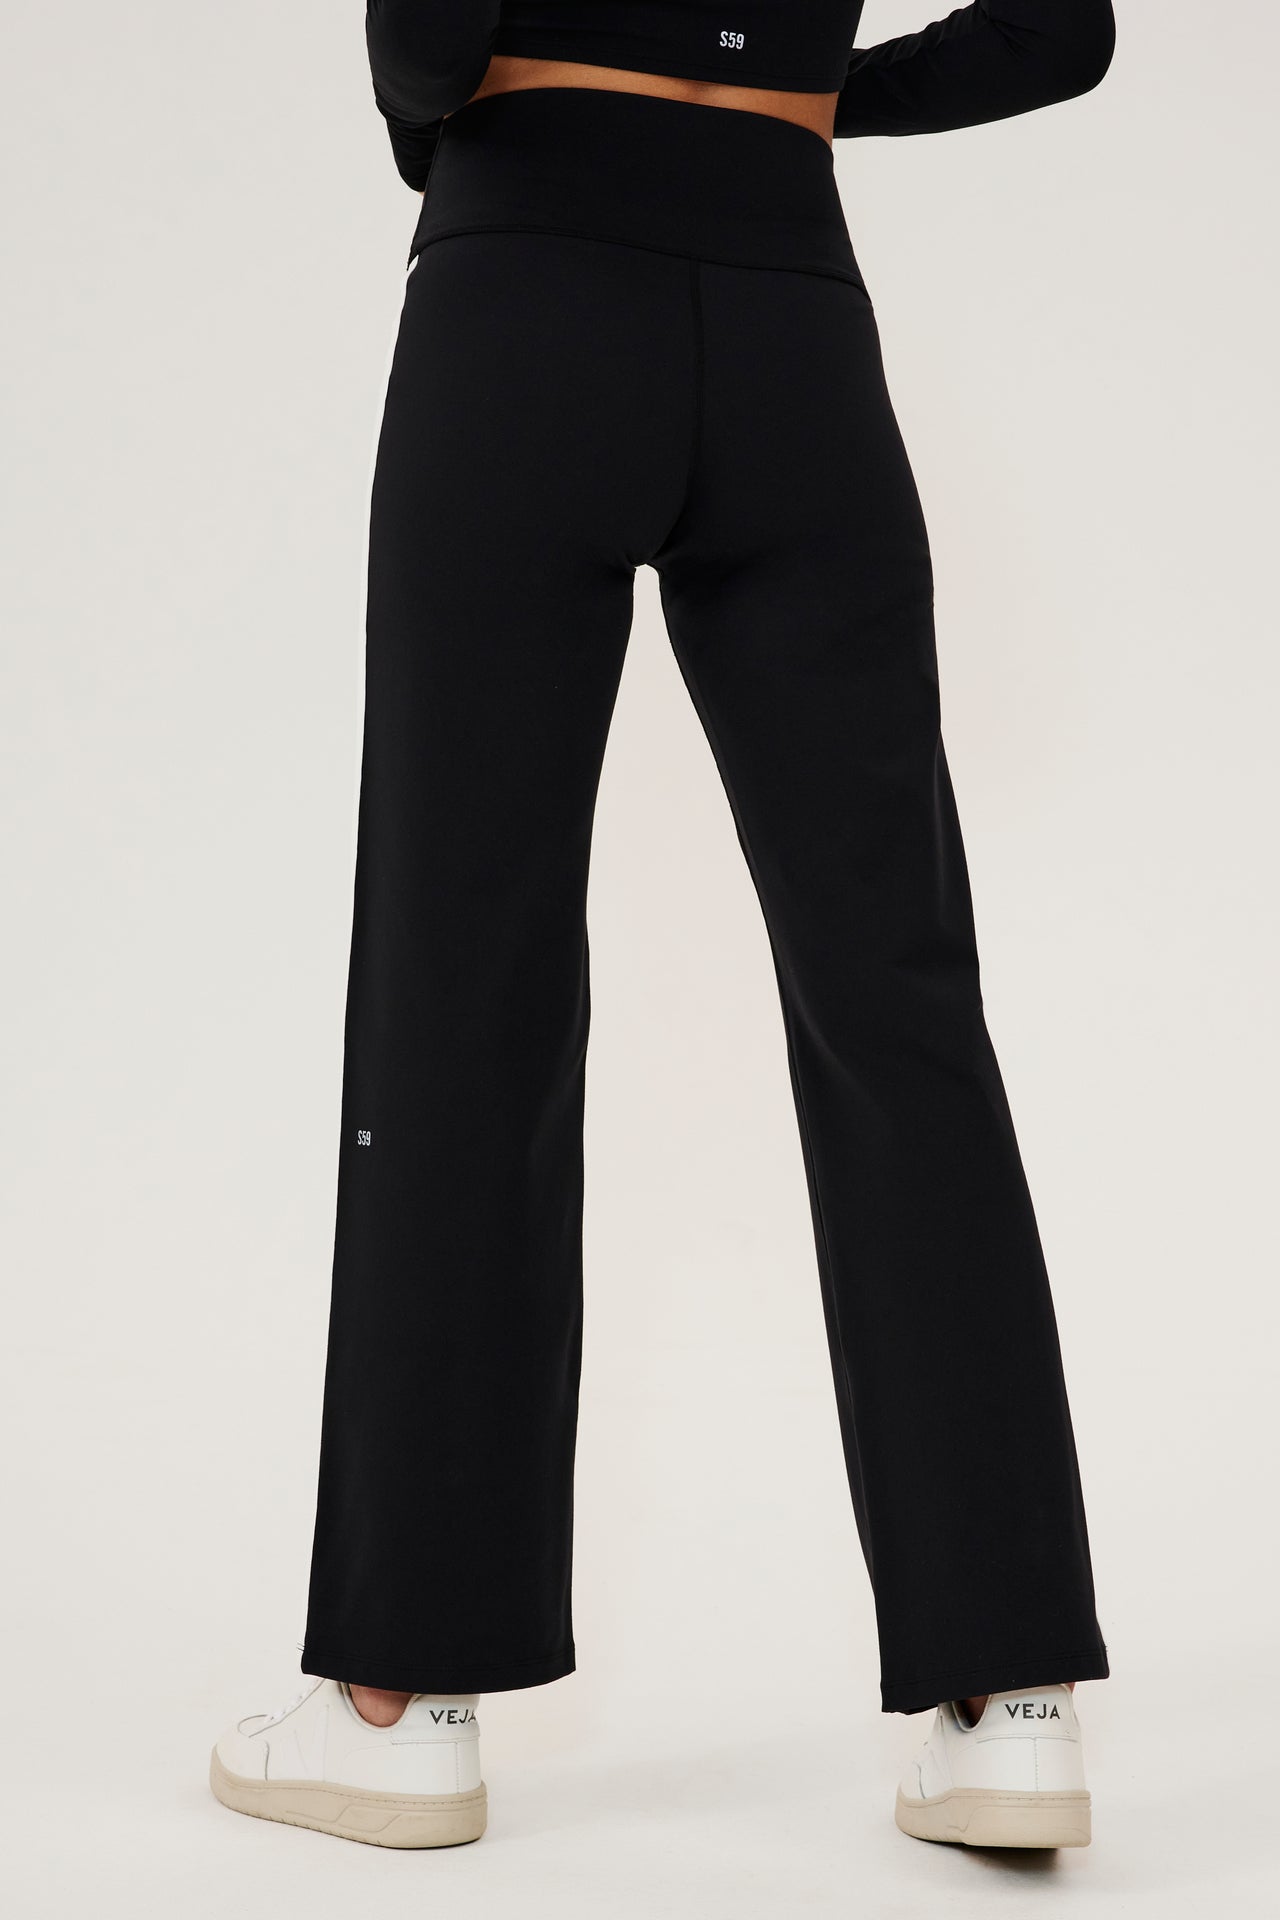 The back view of a woman wearing SPLITS59 Harper Supplex Pant - Black/White with a side stripe.